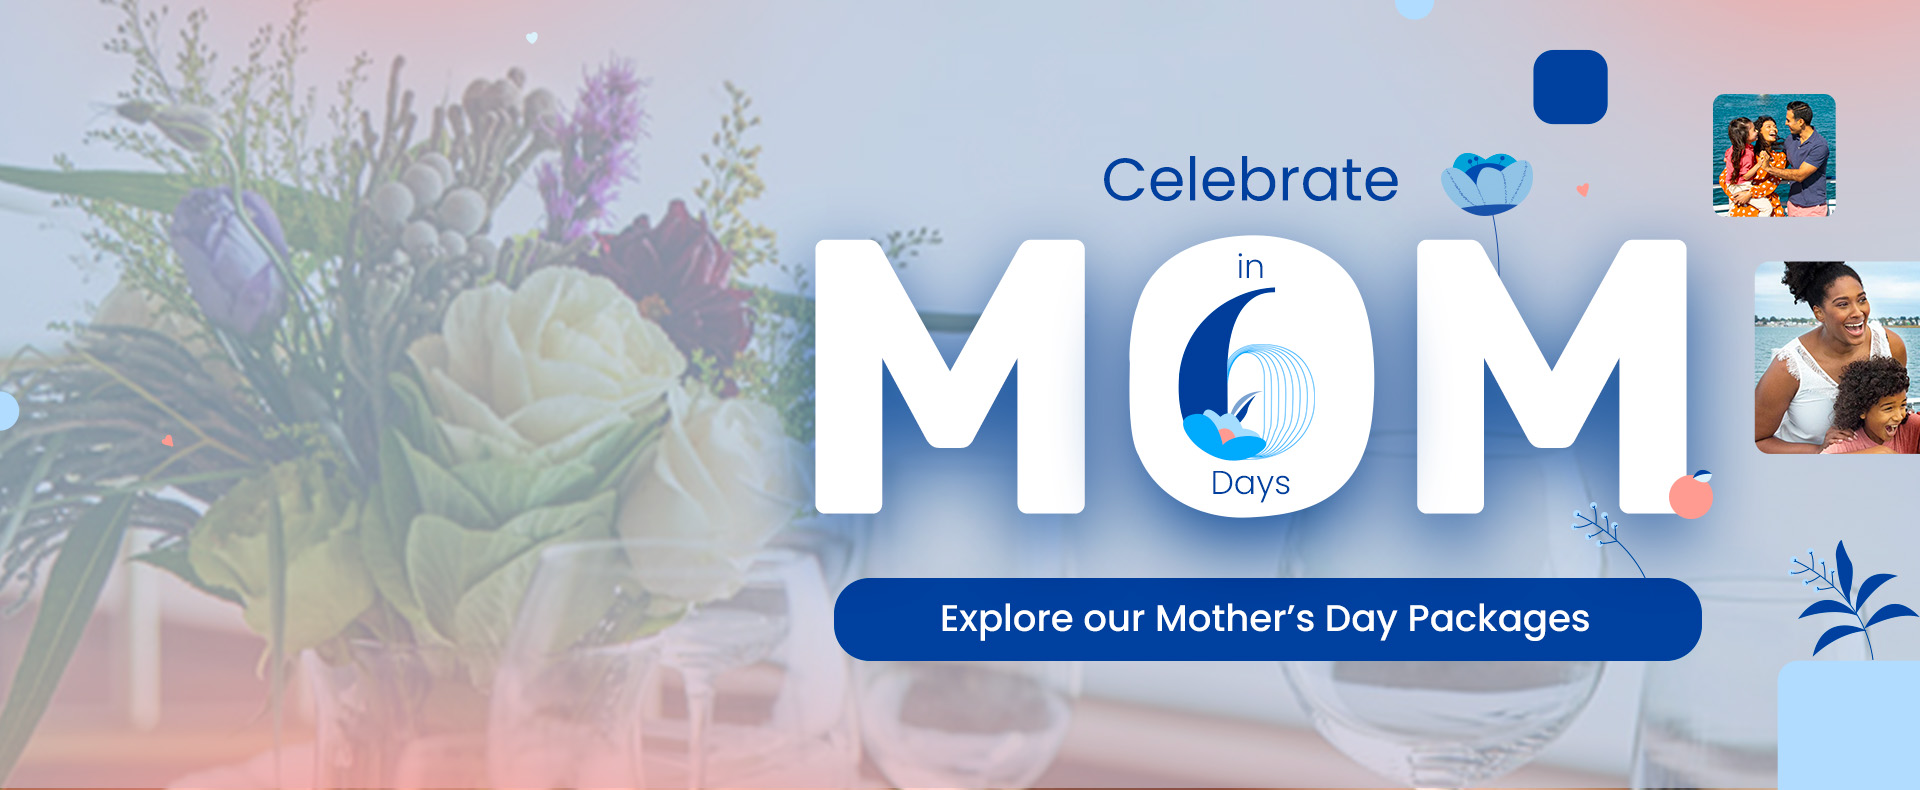 Mother’s Day countdown 6 days away